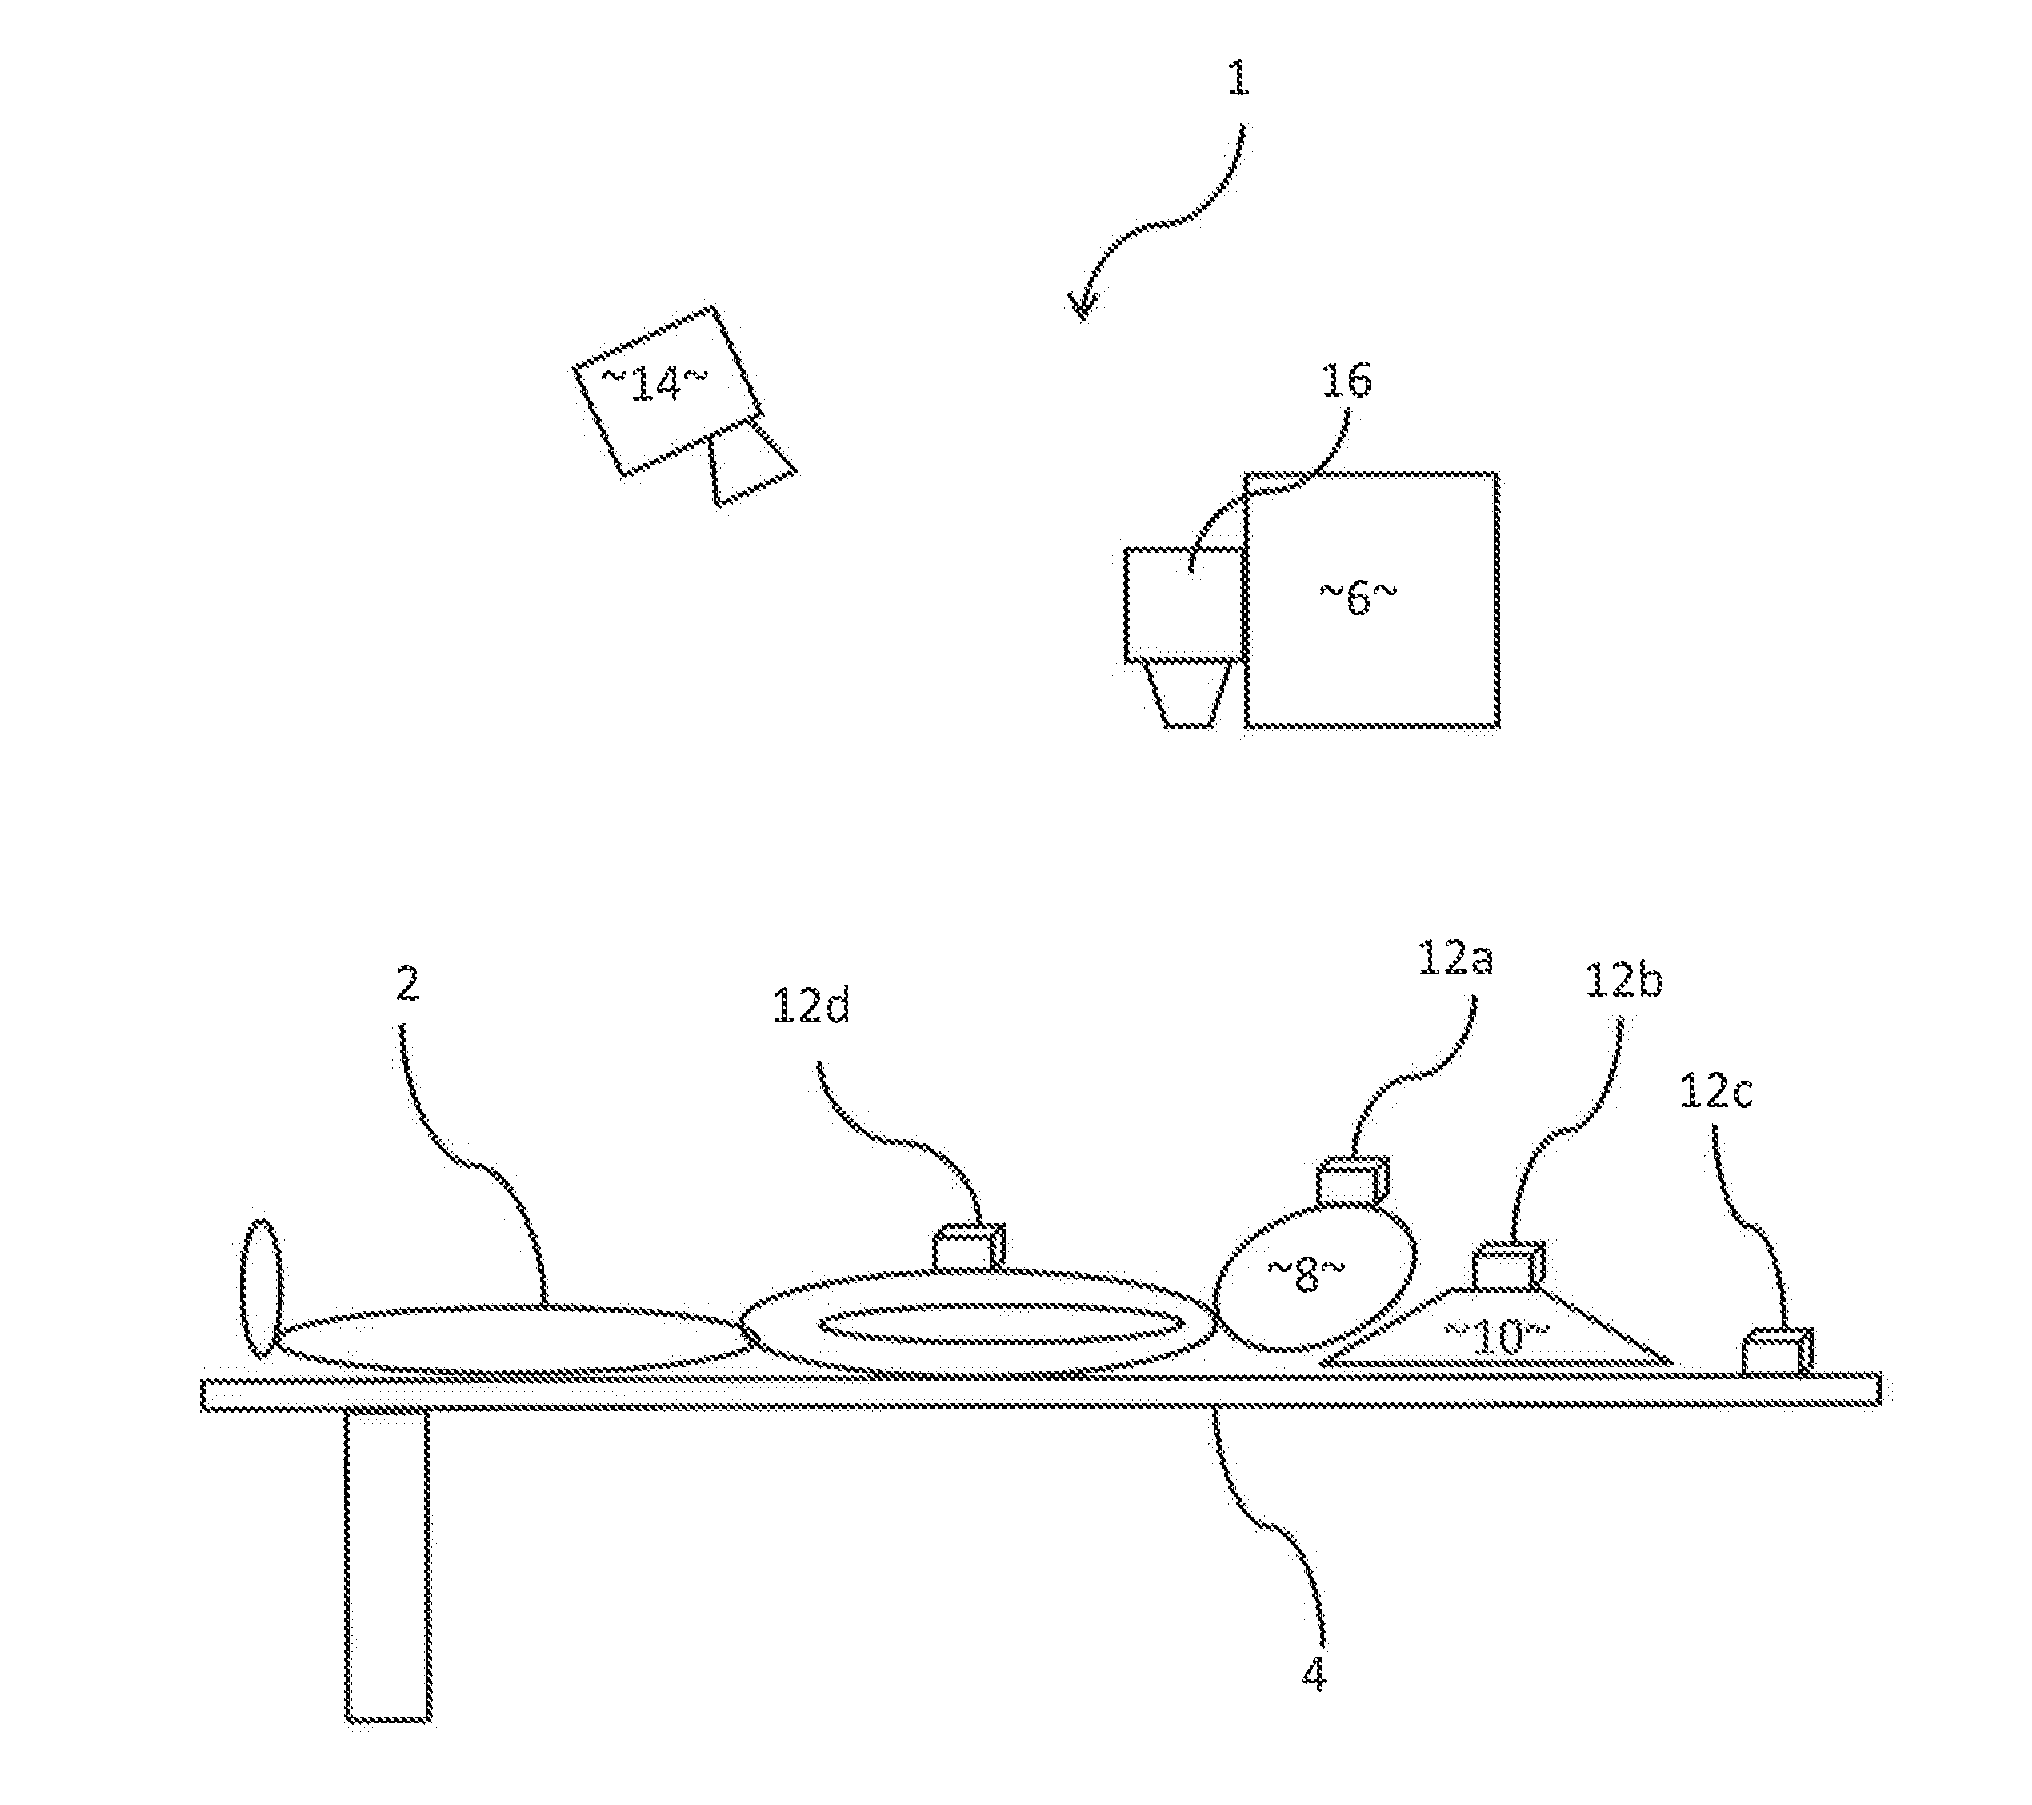 Positioning system for radiotherapy treatment